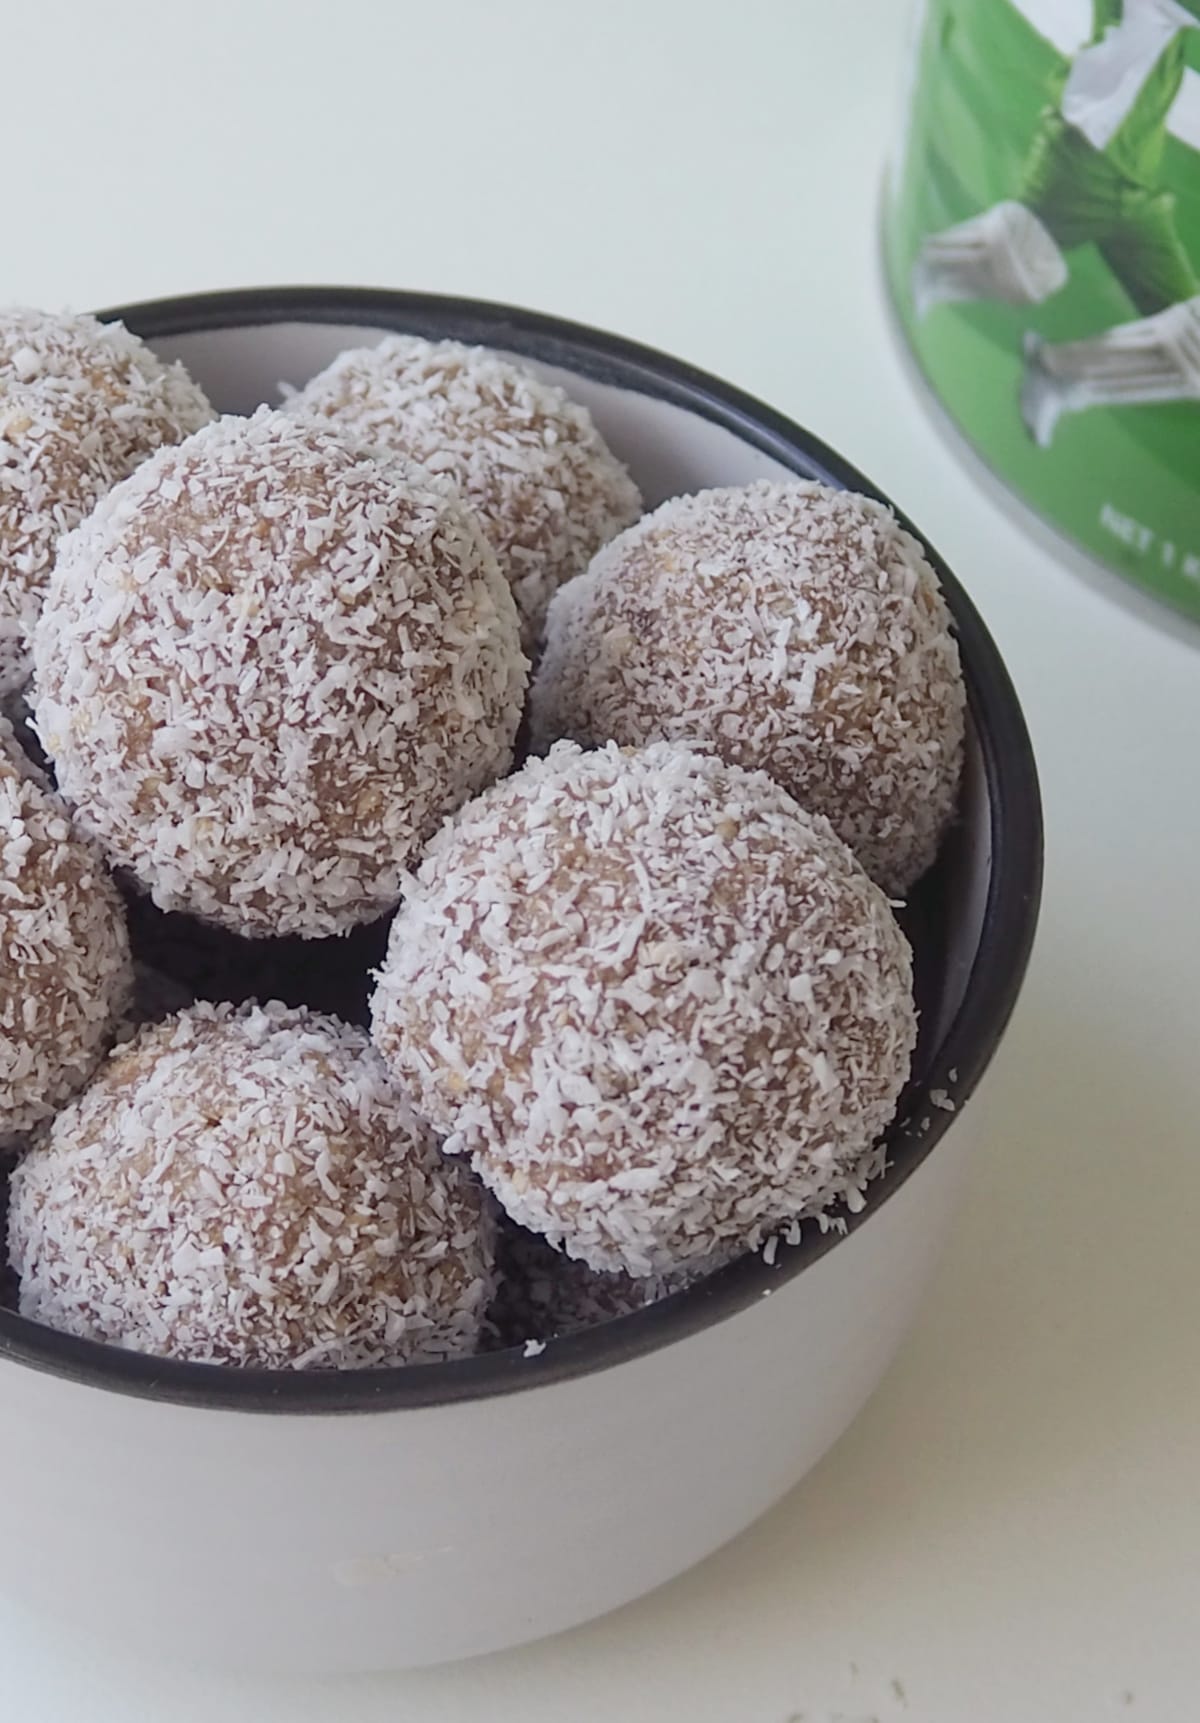 Overhead view of Milo Balls in a white bowl. in the background there is a tin of Milo.